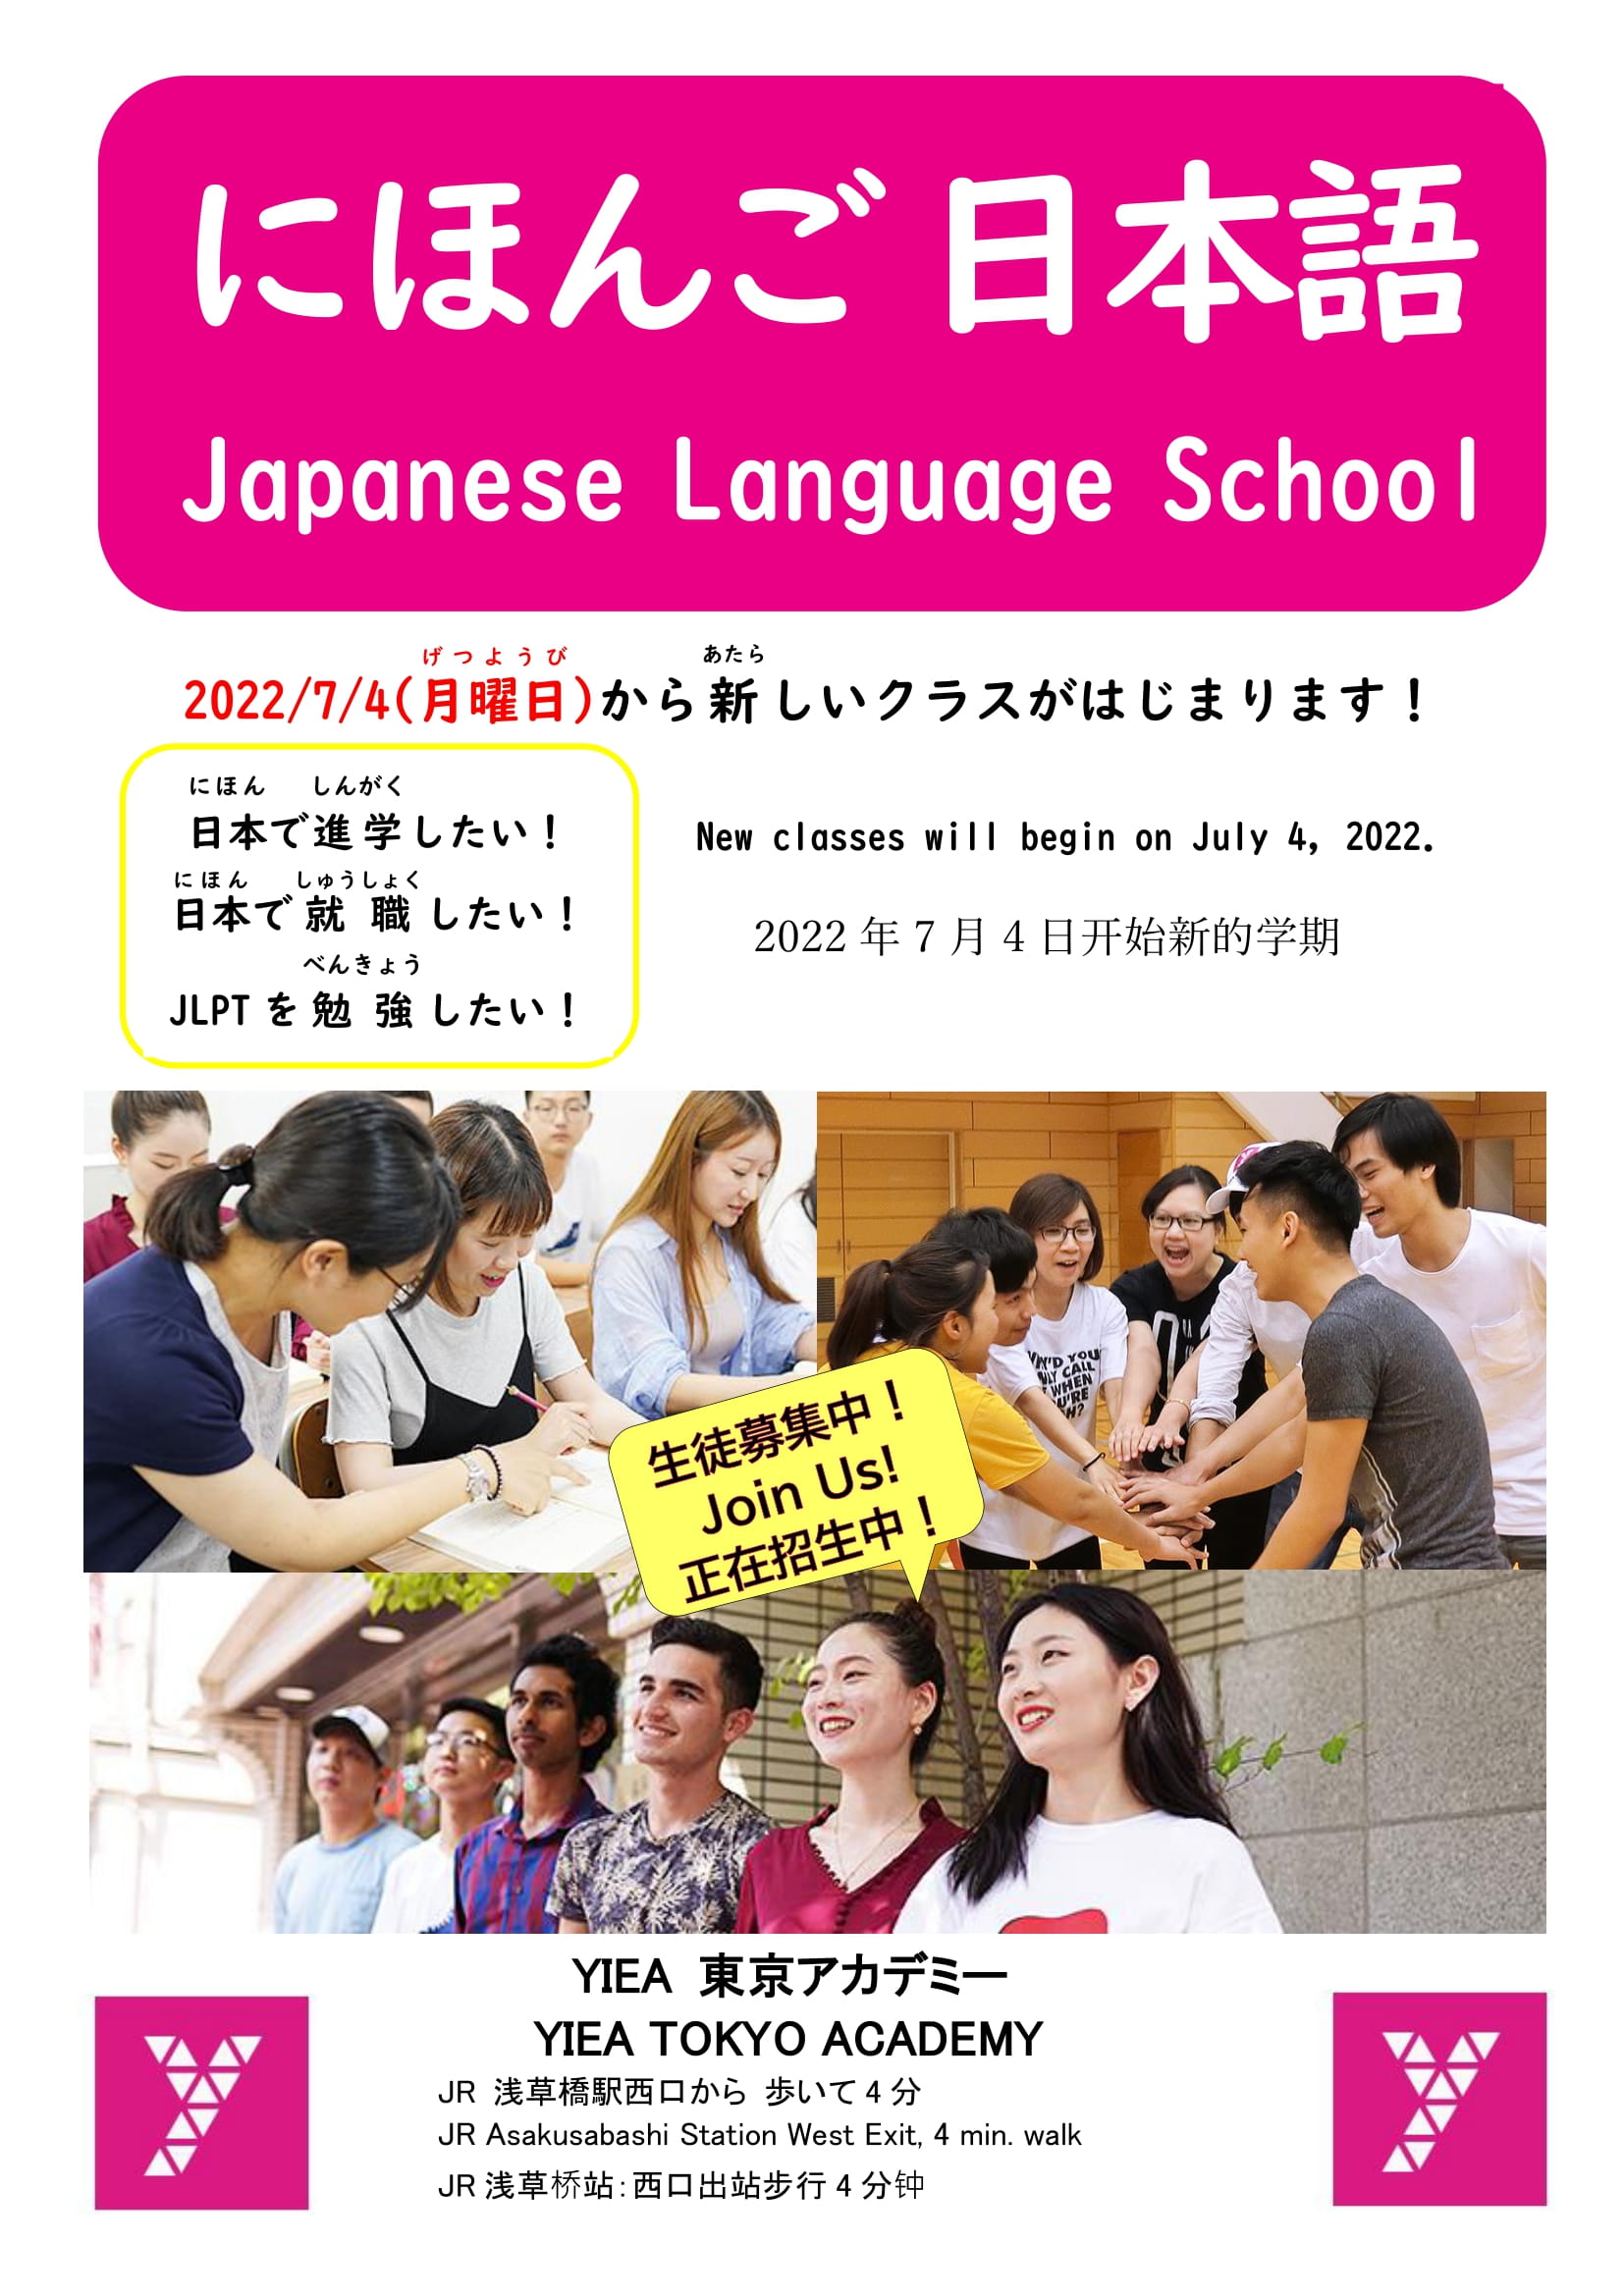 Why don’t we learn Japanese together?